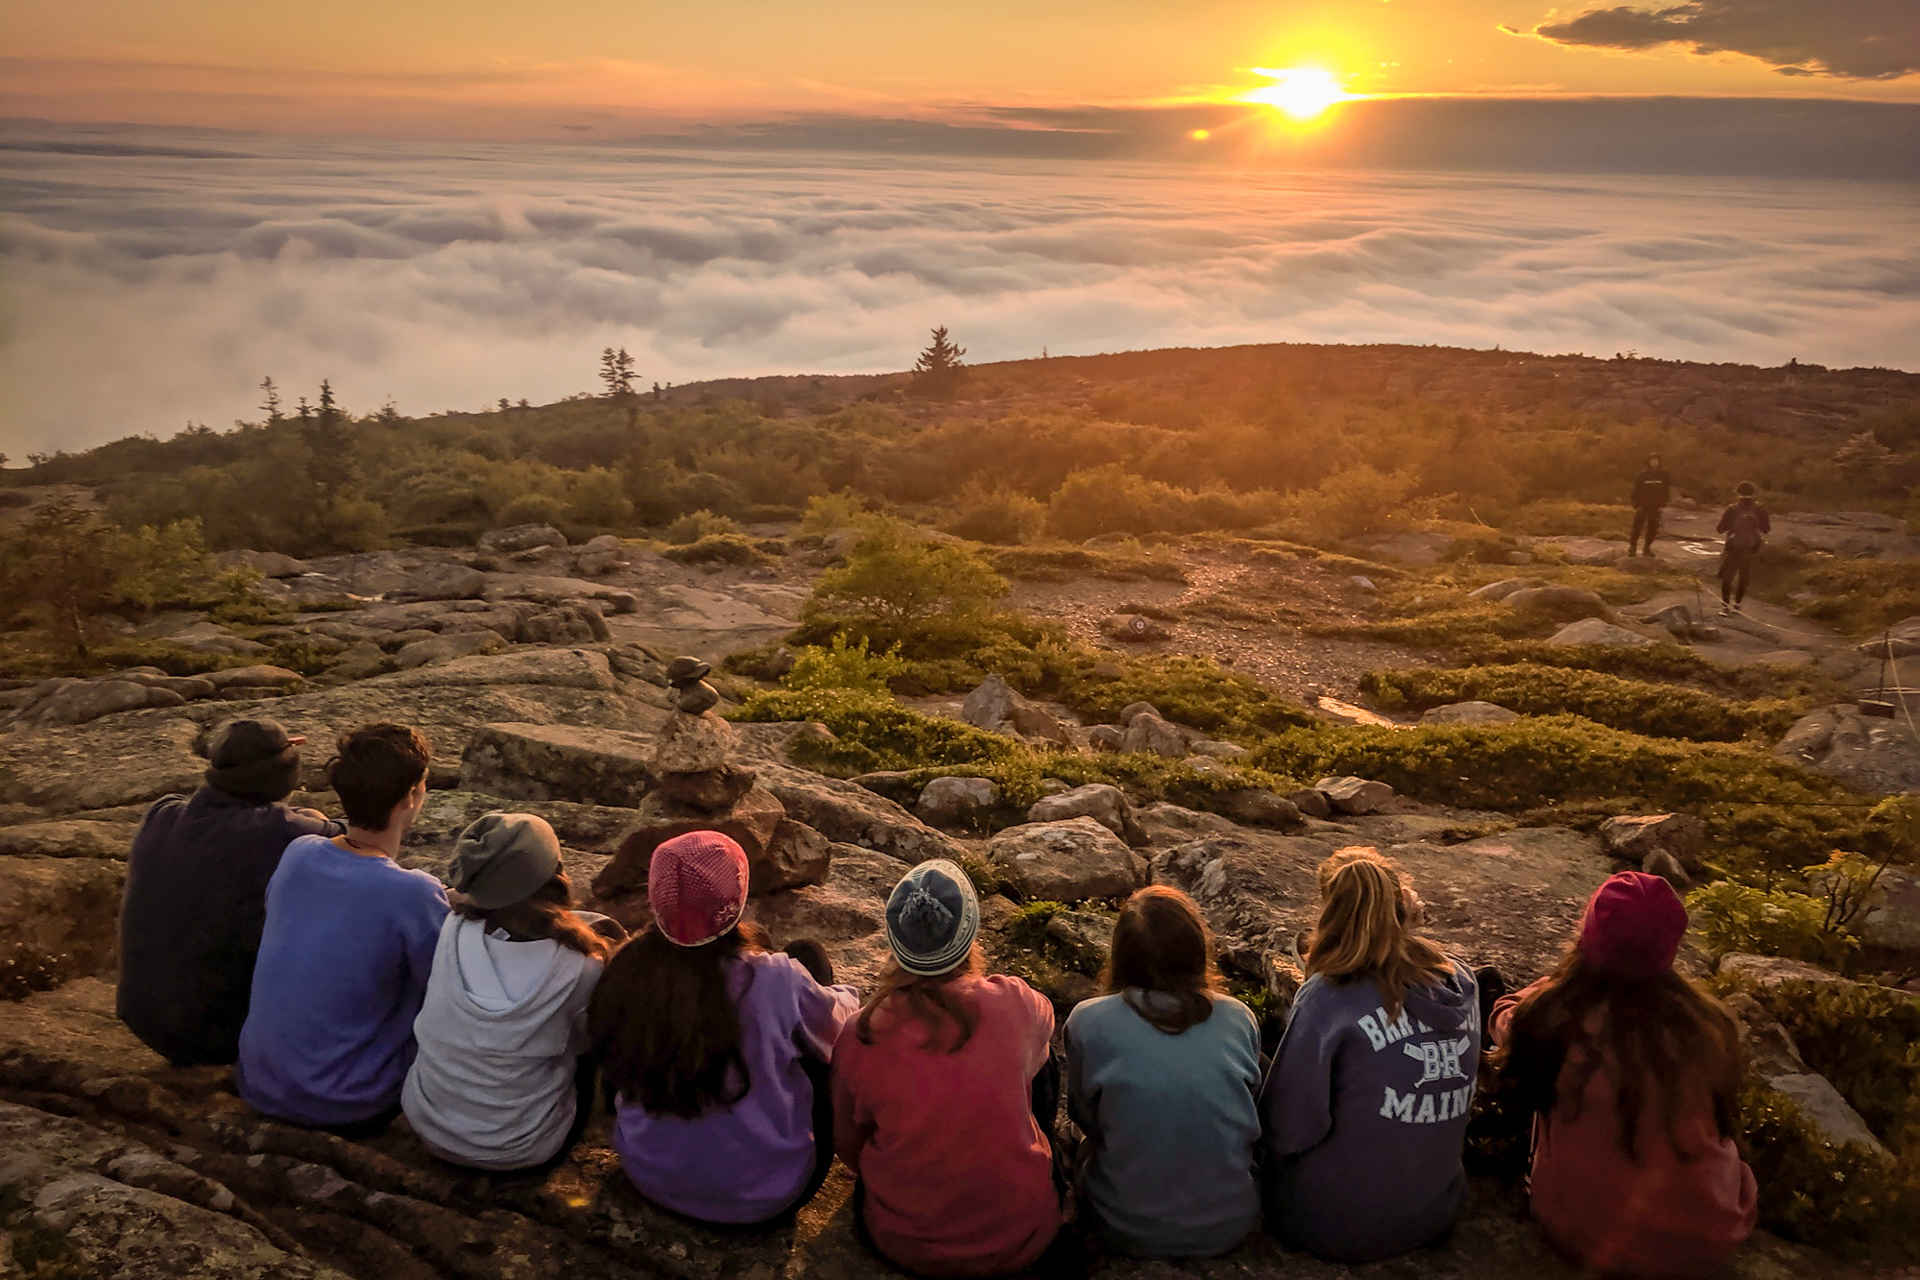 A group of eight teens sits in a row with their backs to the camera, gazing out across a rocky mountain summit with few trees. In the distance, the sun sets over a low-lying bank of fog, which looks like a sea of clouds.